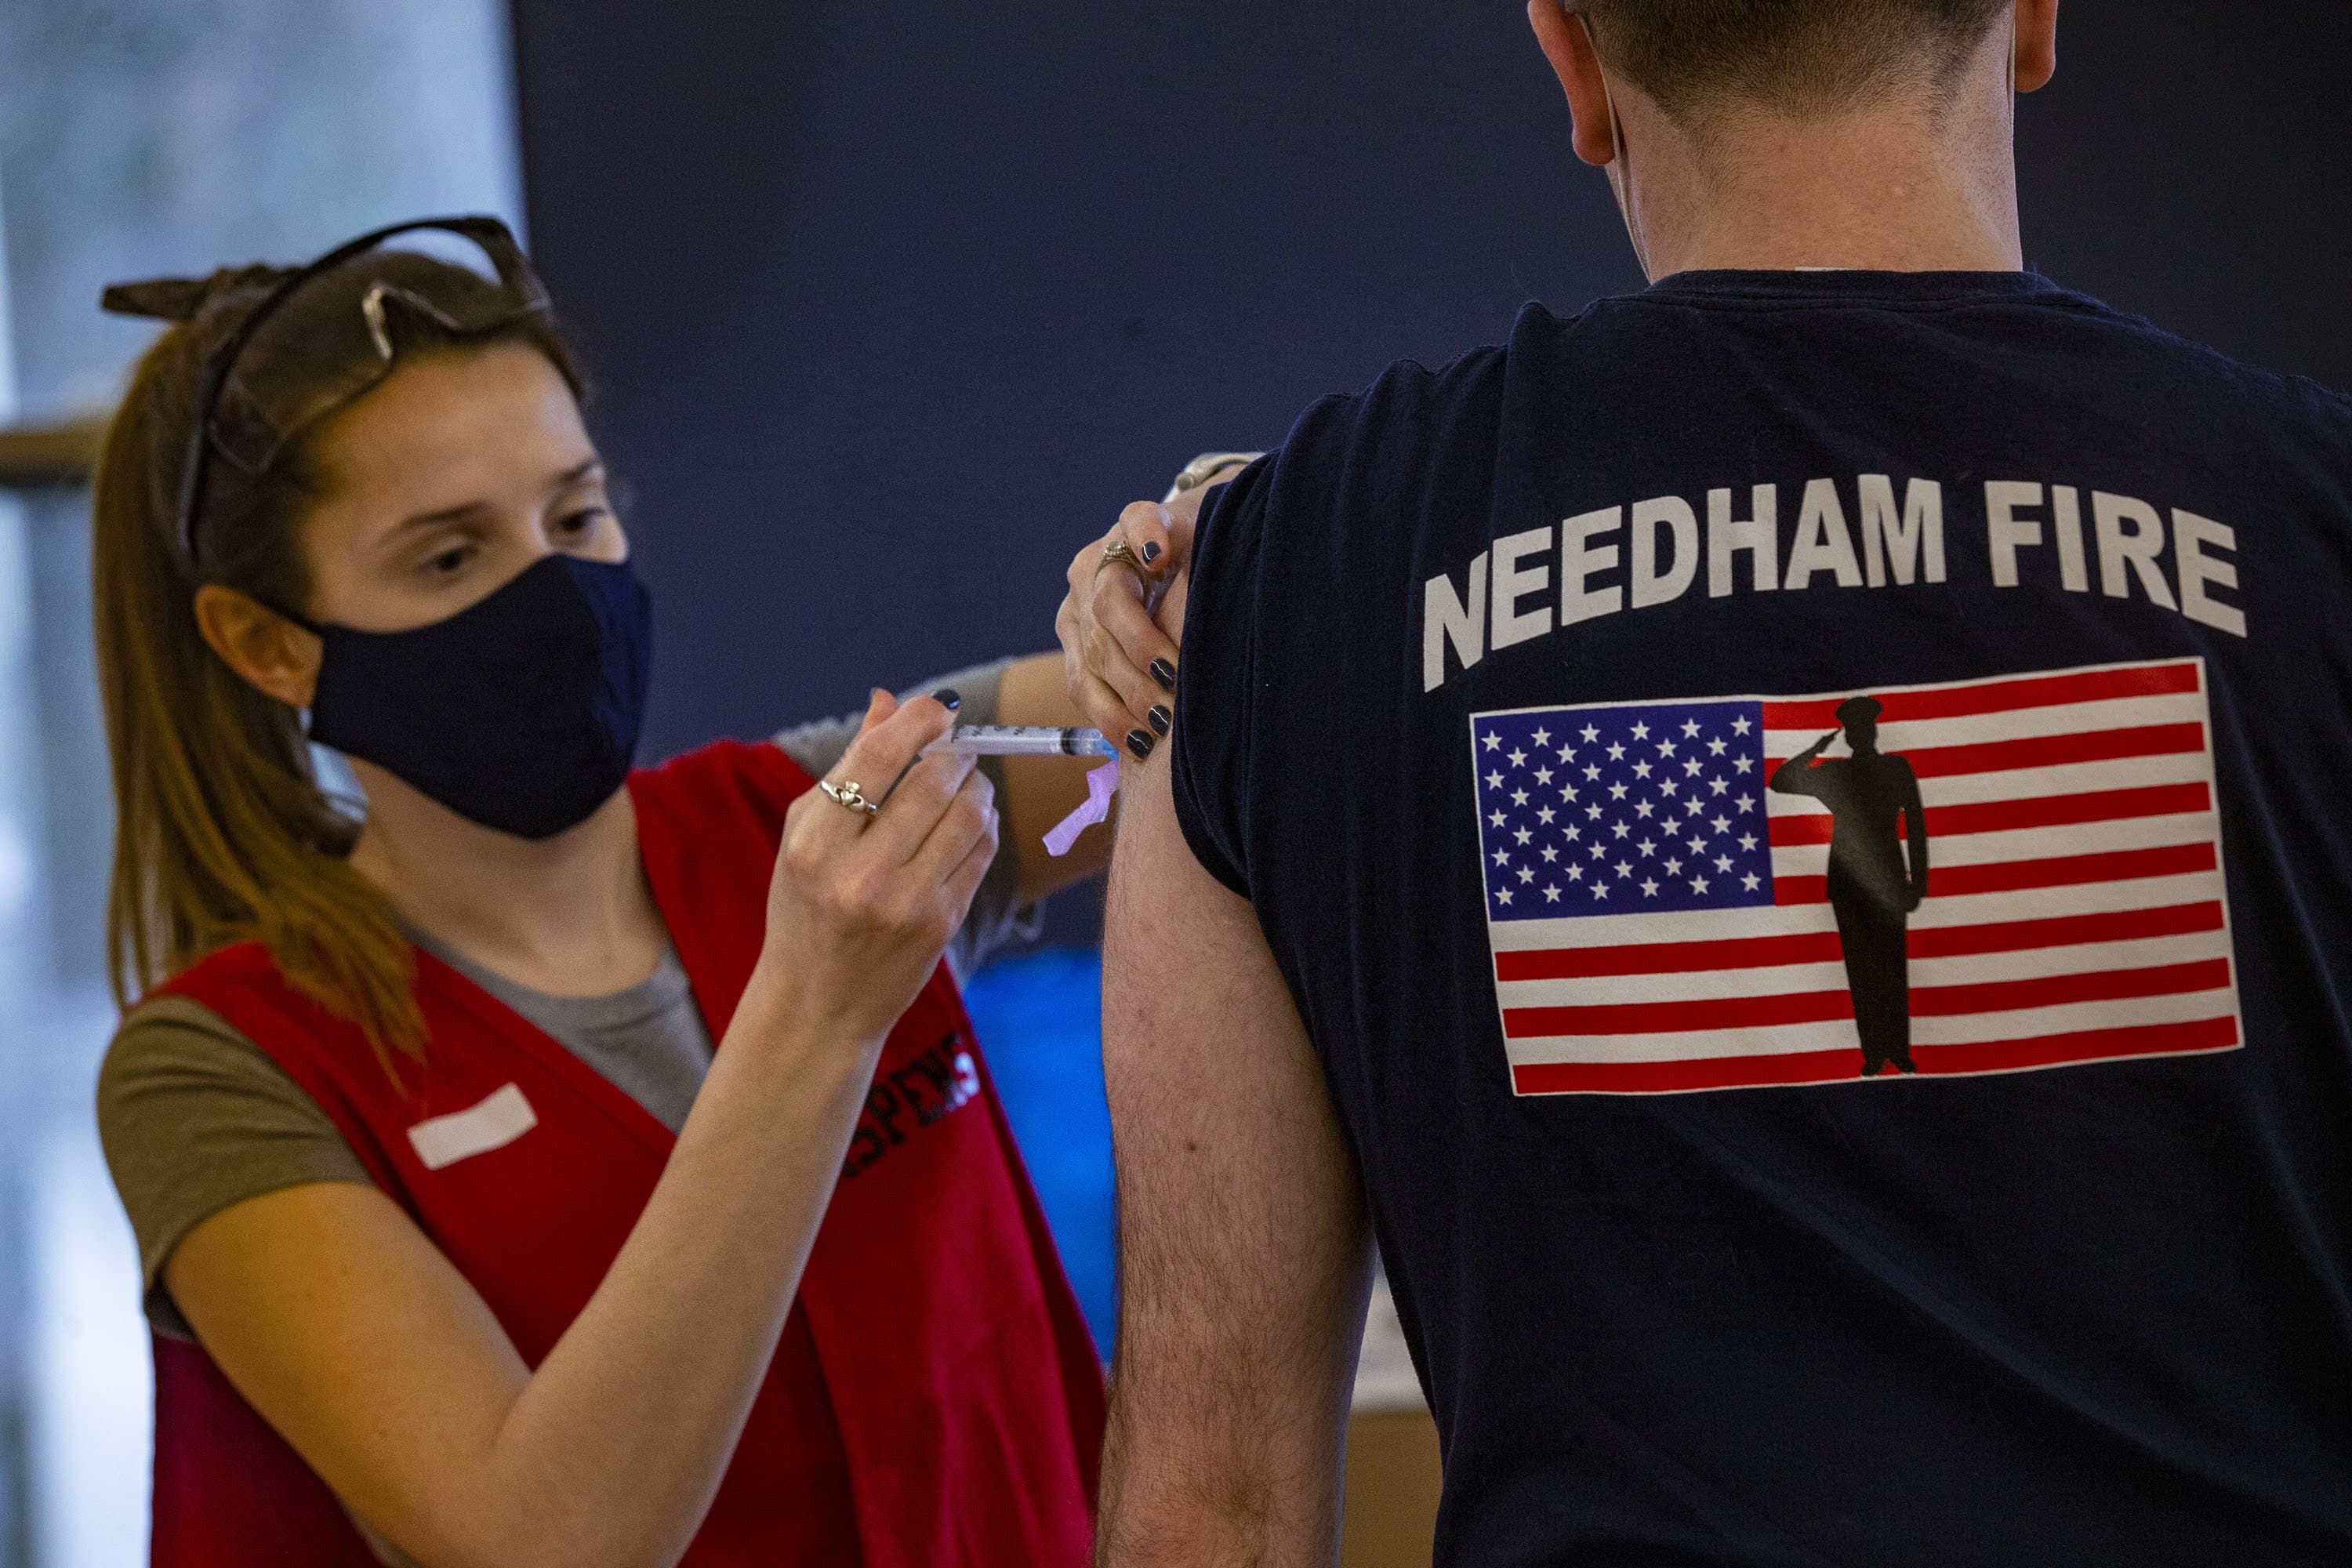 A Needham Firefighter receives the Moderna COVID-19 vaccine at Rosemary Recreational Center in Needham. (Jesse Costa/WBUR)